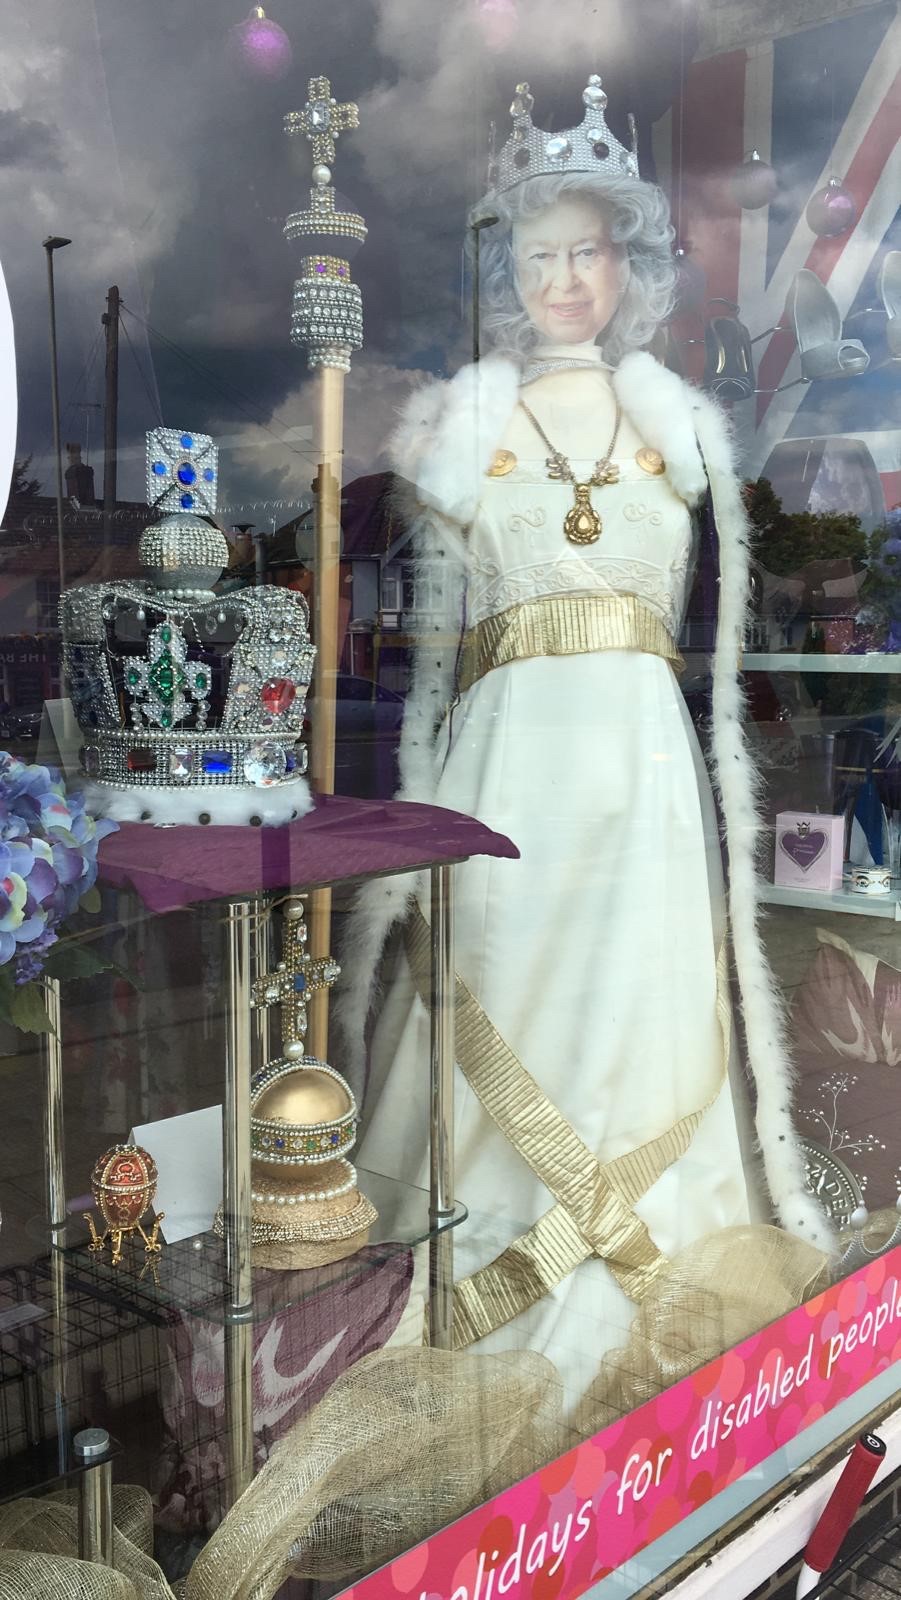 Window display of Revitalise charity shop at Hedge End displaying Platinum Jubilee related clothes and accessories